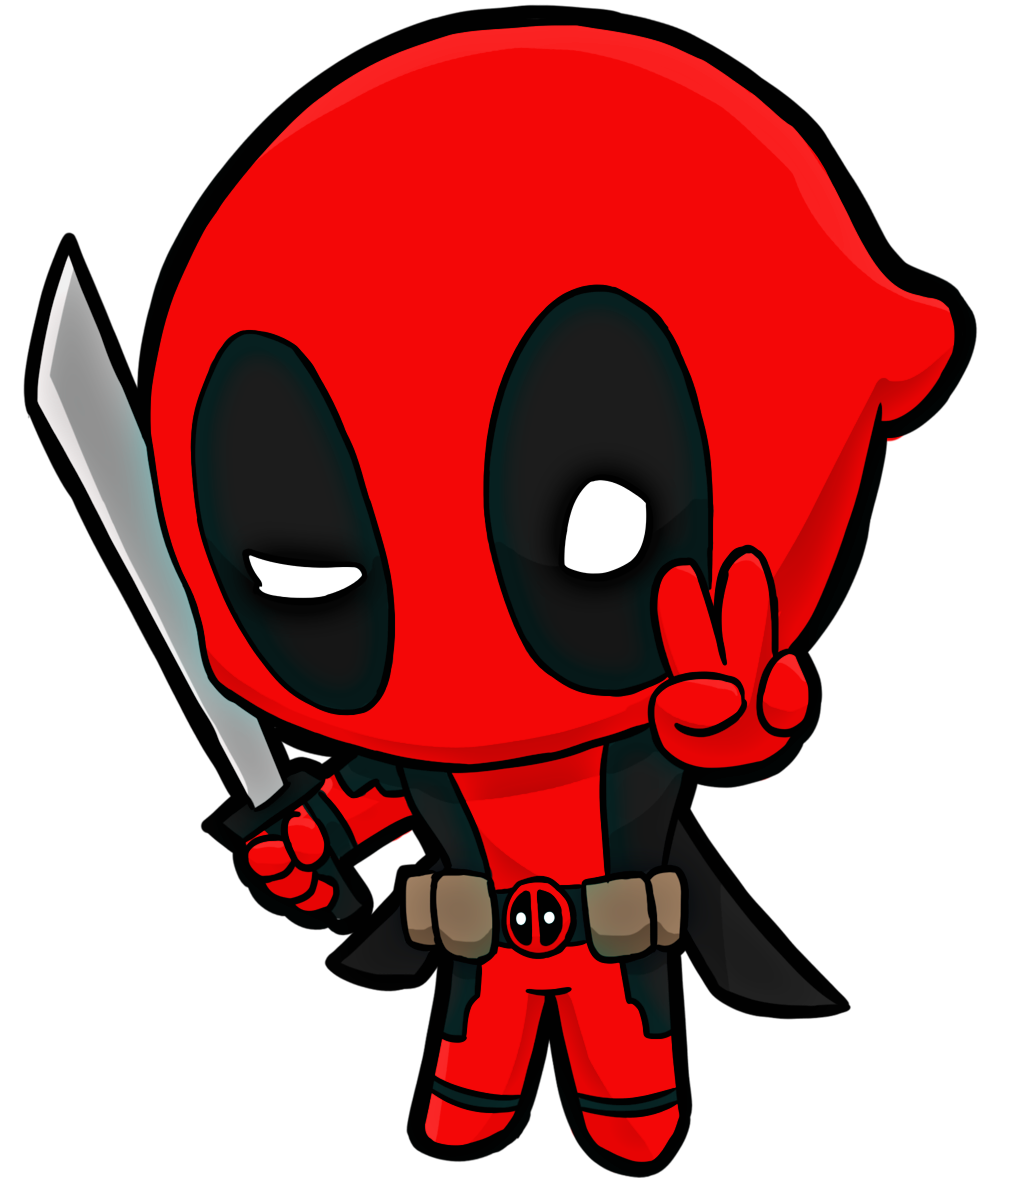 Download Deadpool clipart animated, Deadpool animated Transparent FREE for download on WebStockReview 2021